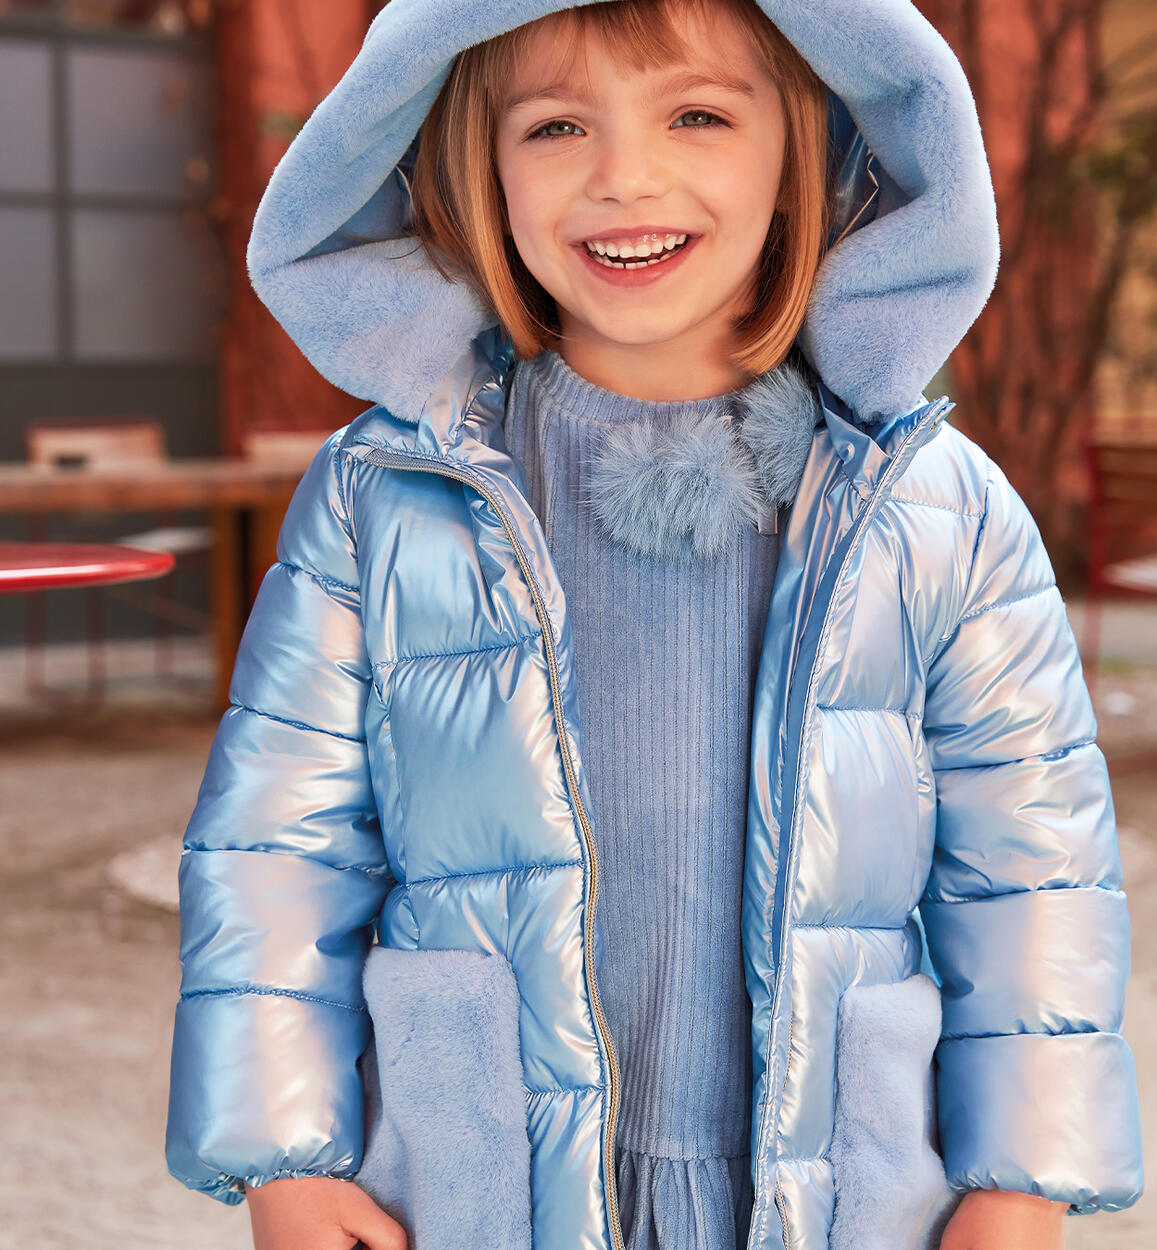 iDO pearly padded jacket for girls aged 9 months to 8 years